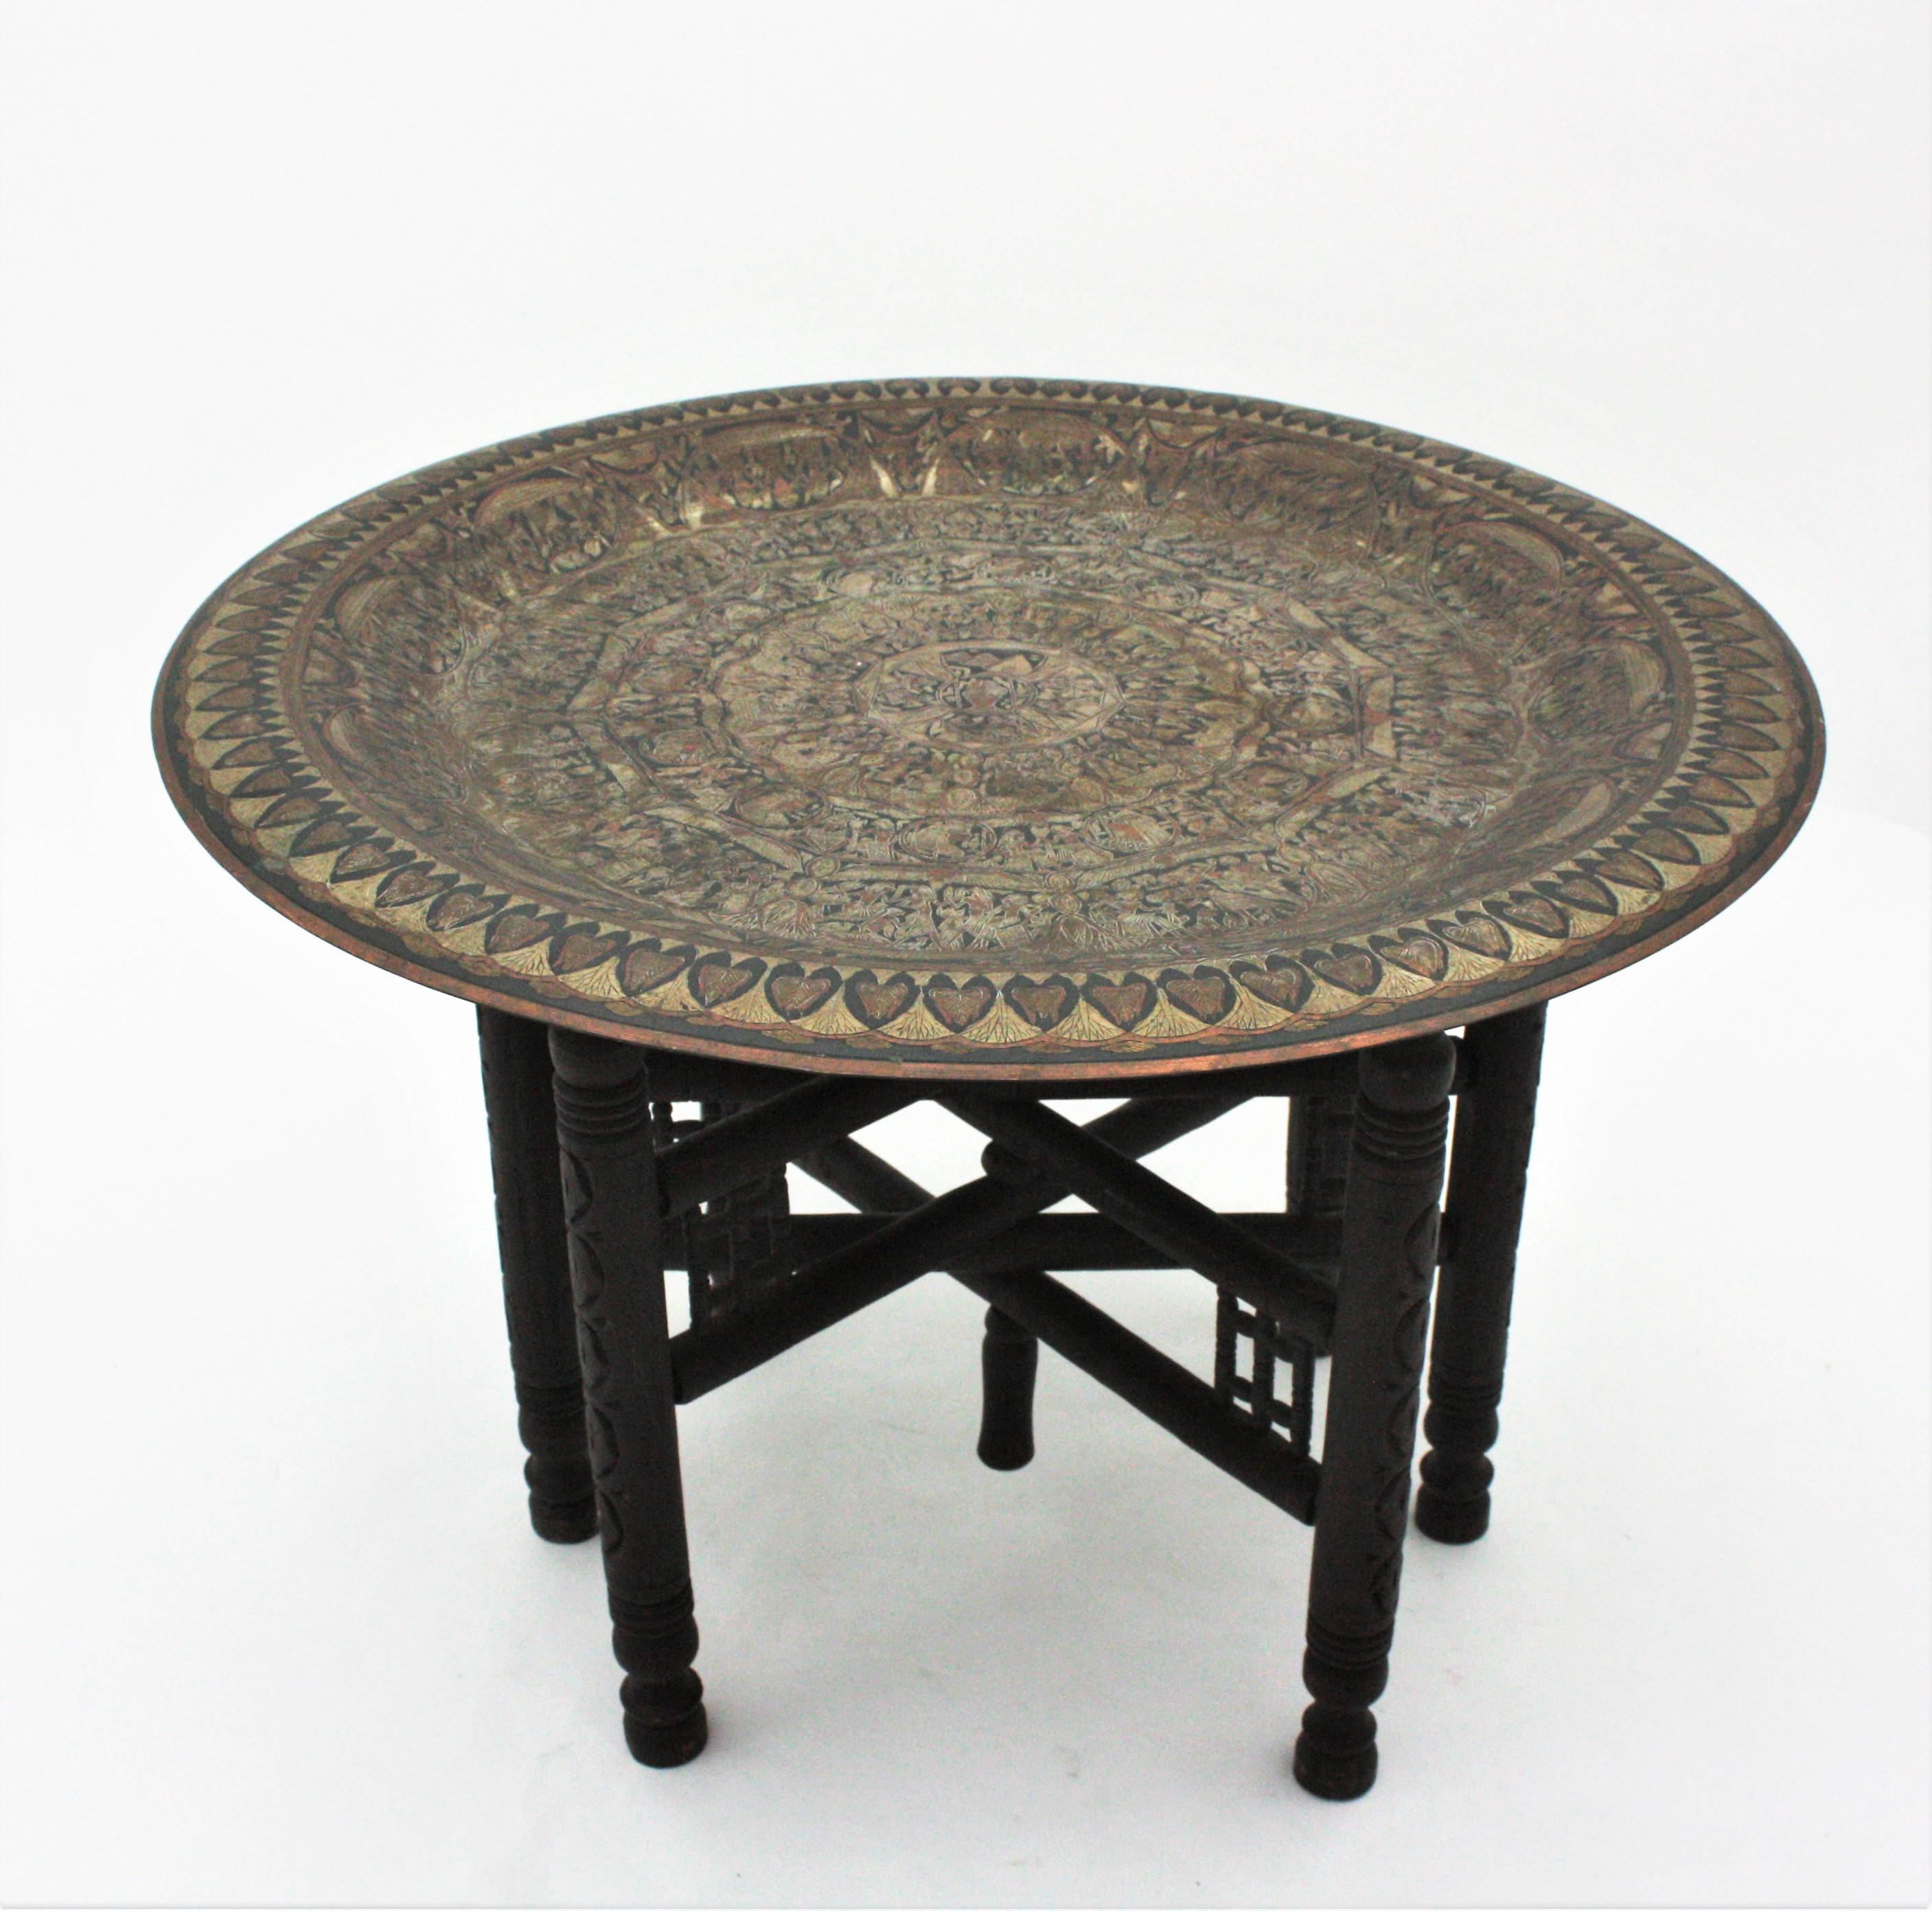 Large egyptian brass tray table with wood folding base, 1950s
The removable round bras top has a very detailed hand engraved decoration with polychrome egyptian designs. It stands up on a wooden carved folding base with 6 turned legs.
Very fine and